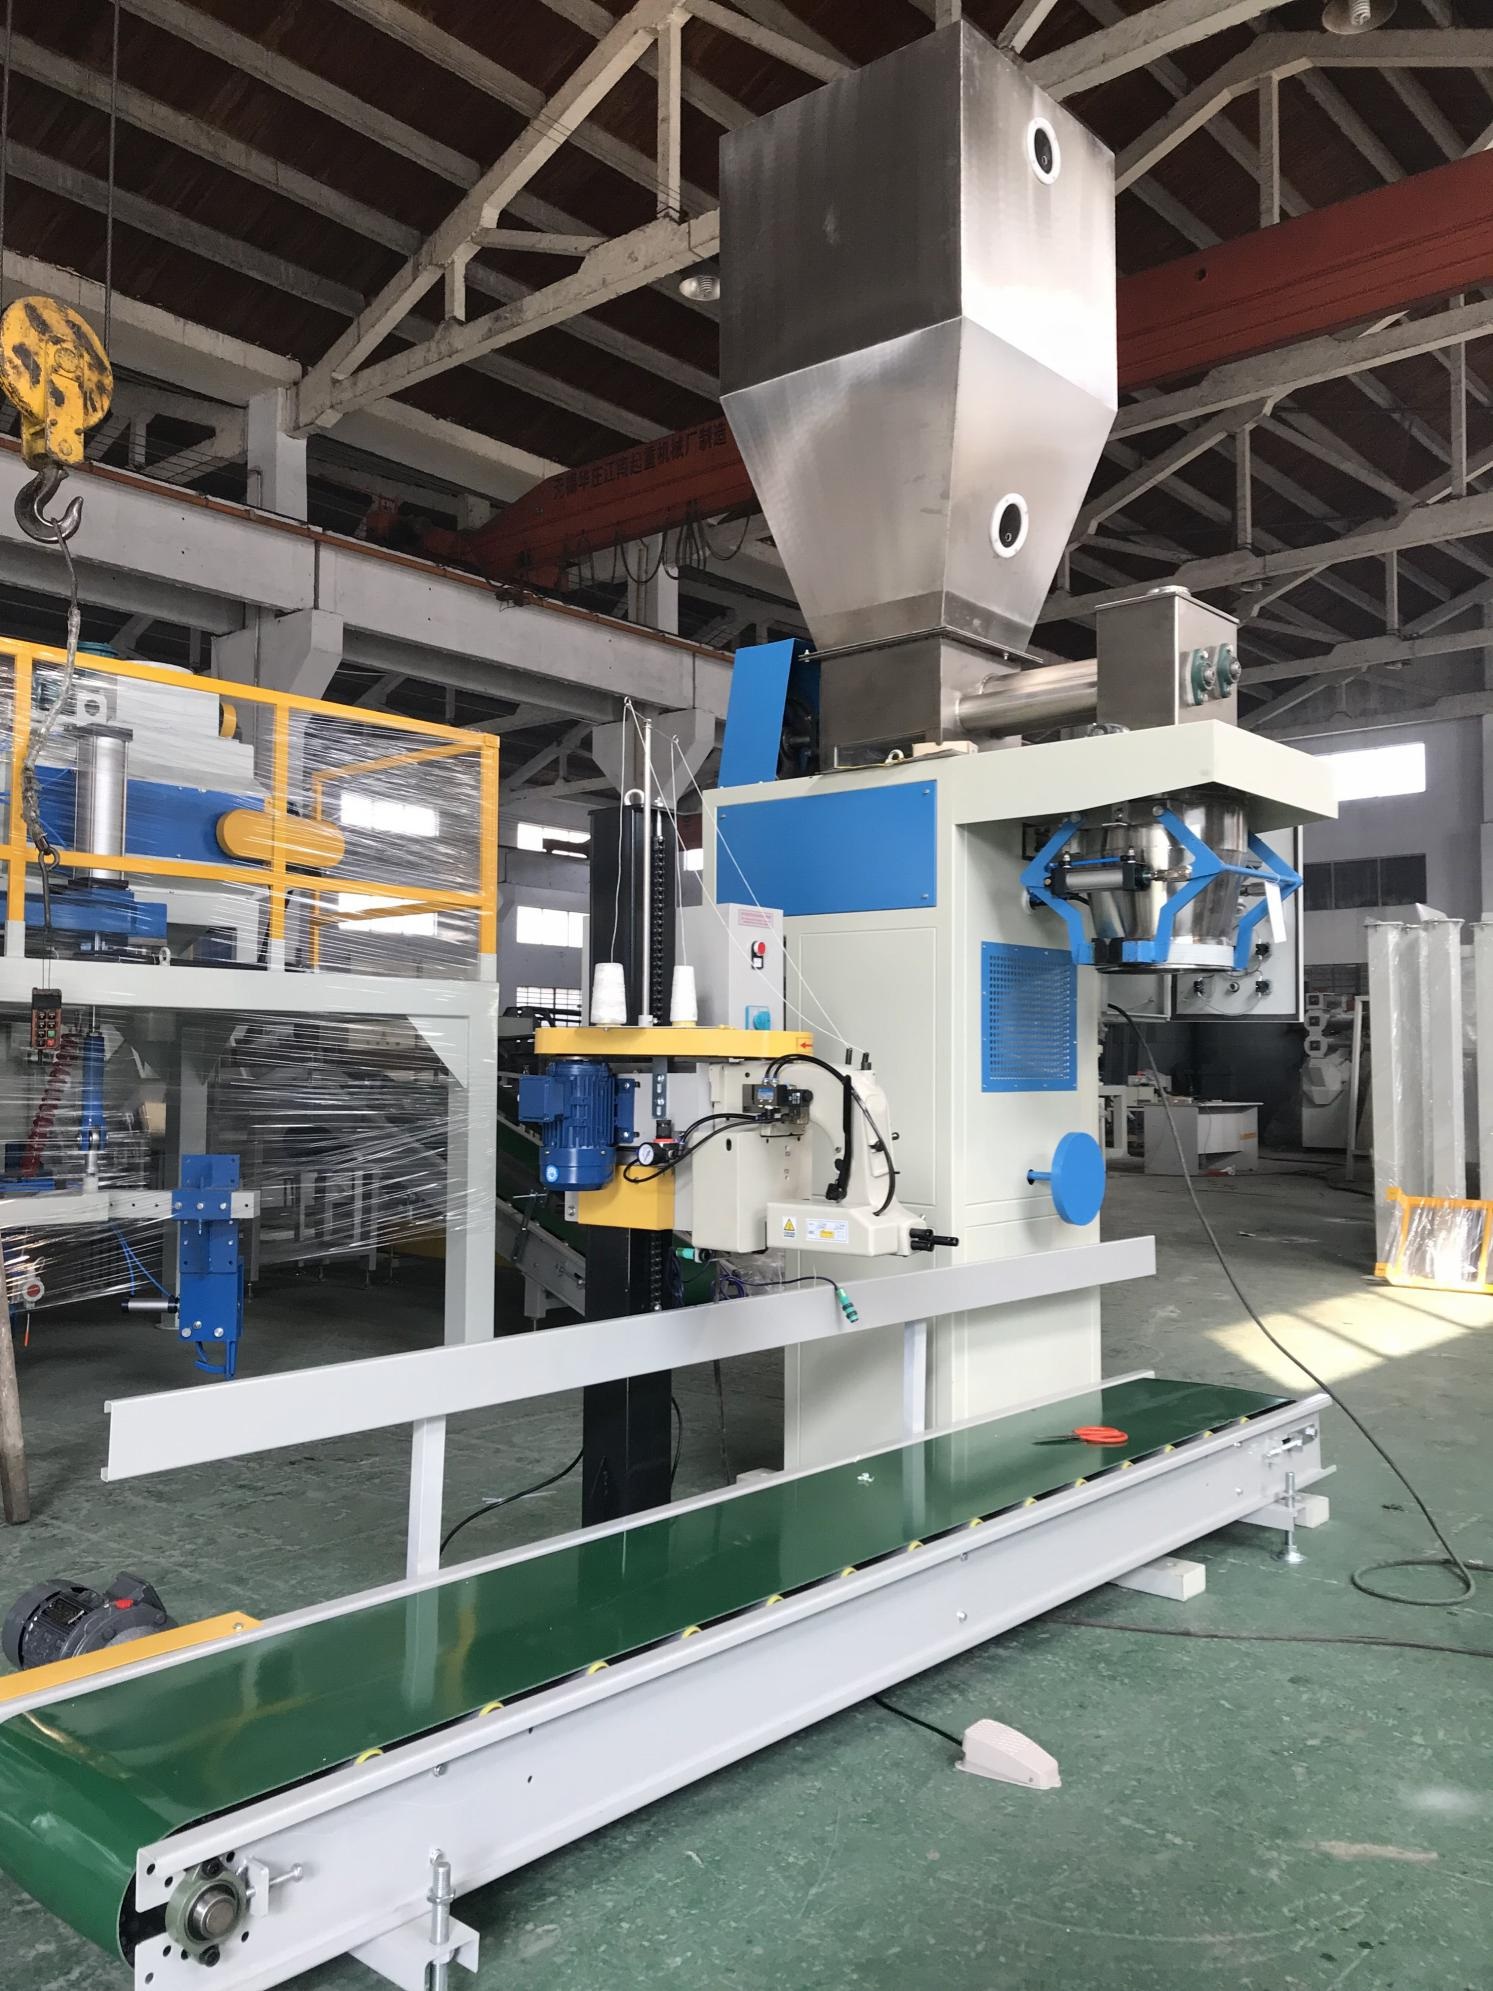 organic flour bagging machine, natural flour bagging system, wheat flour bagging line, automated bagging system produced by WUXI HY MACHINERY CO., LTD 无锡航一机械有限公司